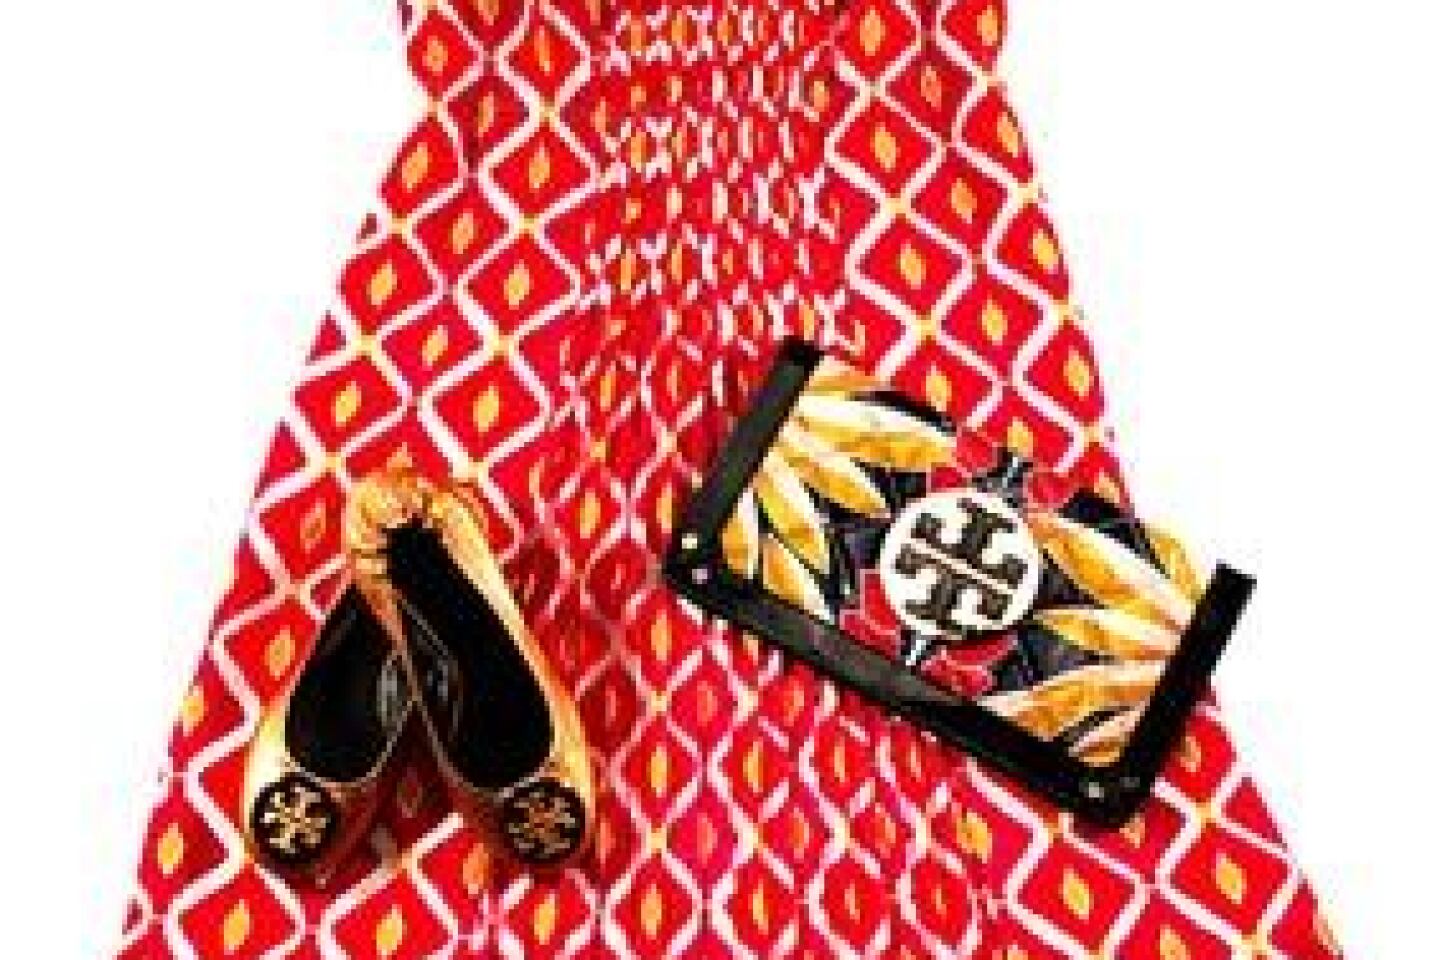 Tory Burch has turned her line of classics into a must-have lifestyle brand  - Los Angeles Times